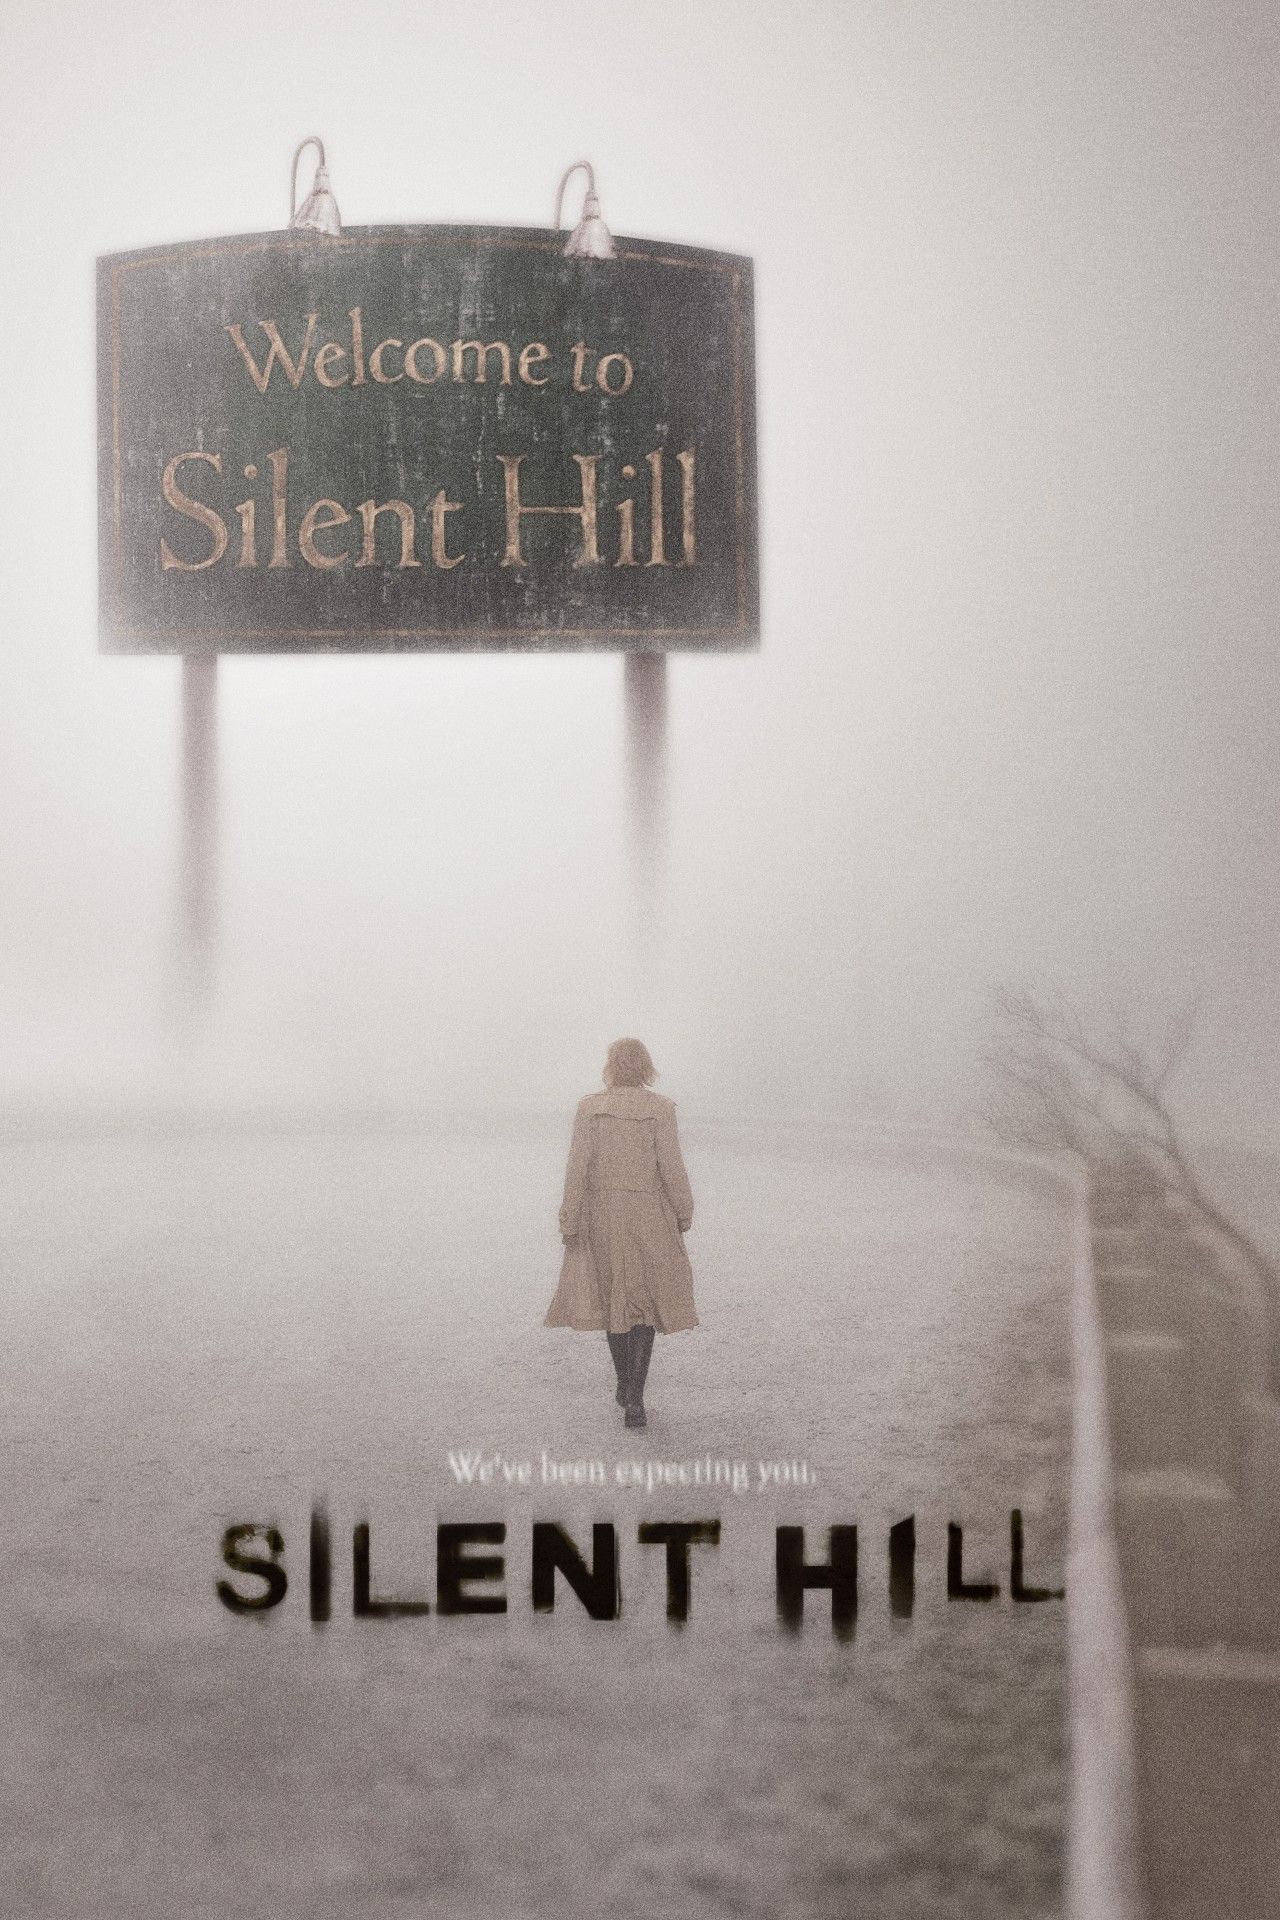 The next Silent Hill movie, Return to Silent Hill, has been